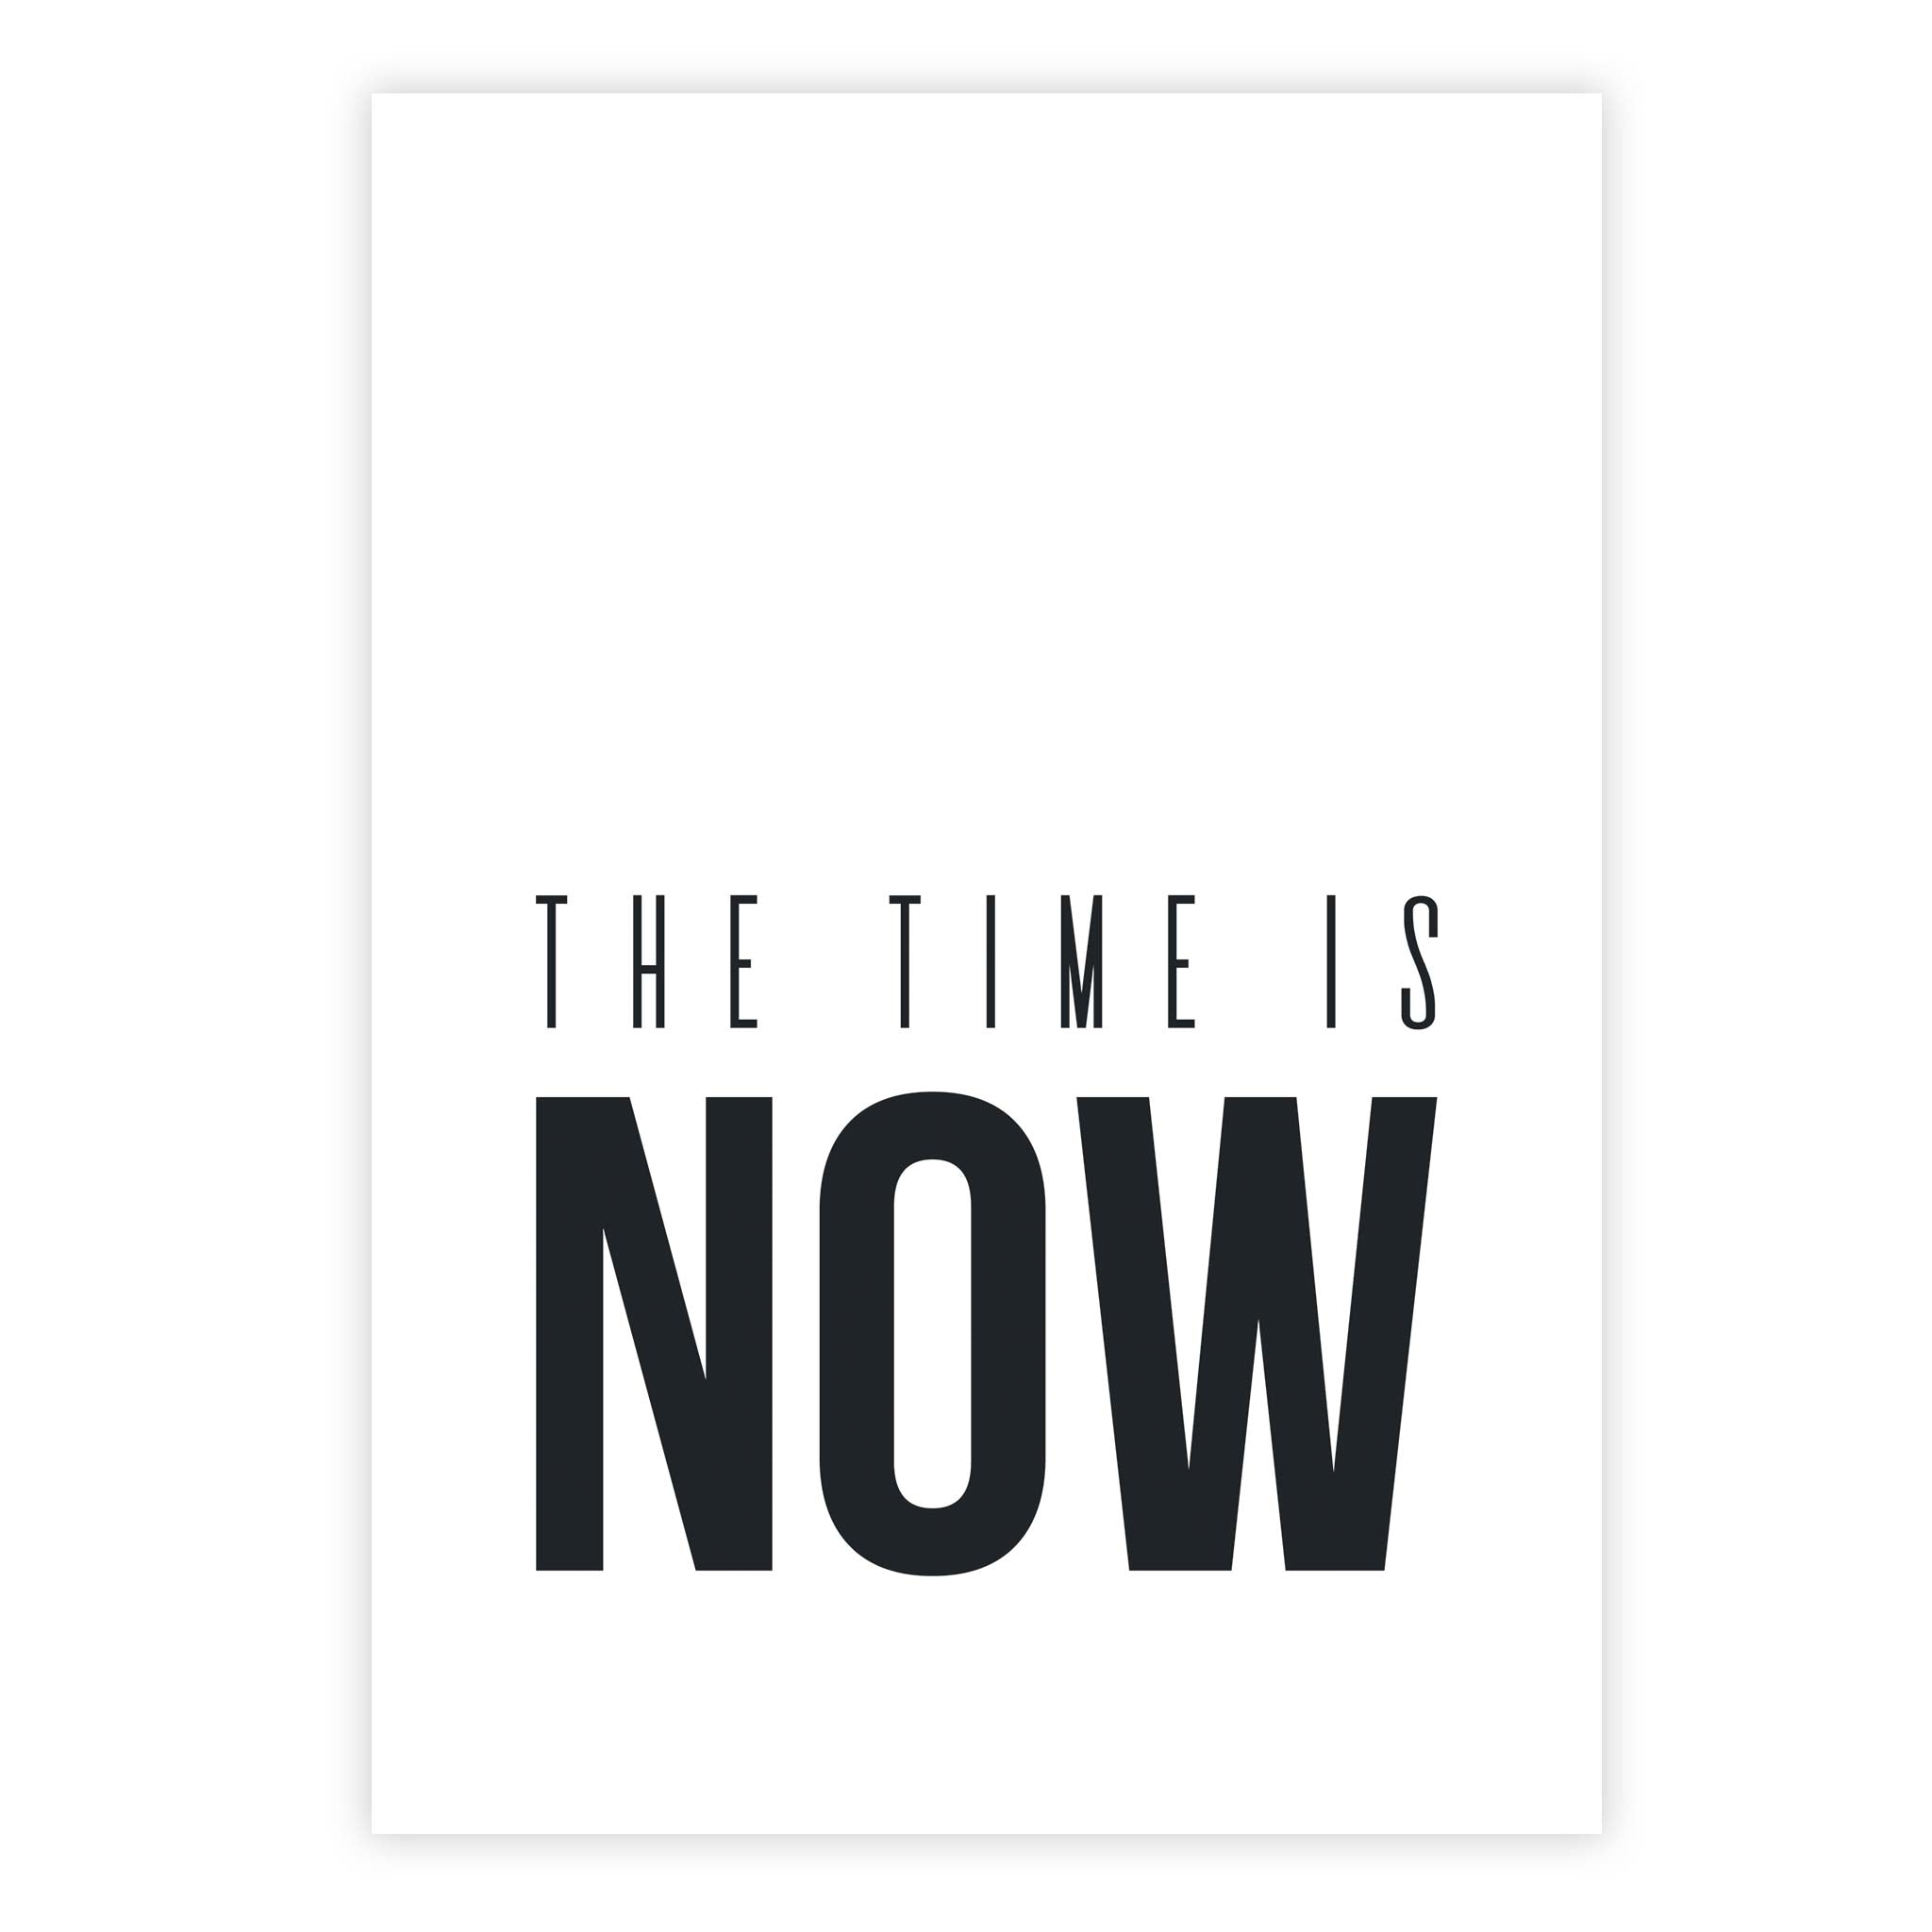 The time is now